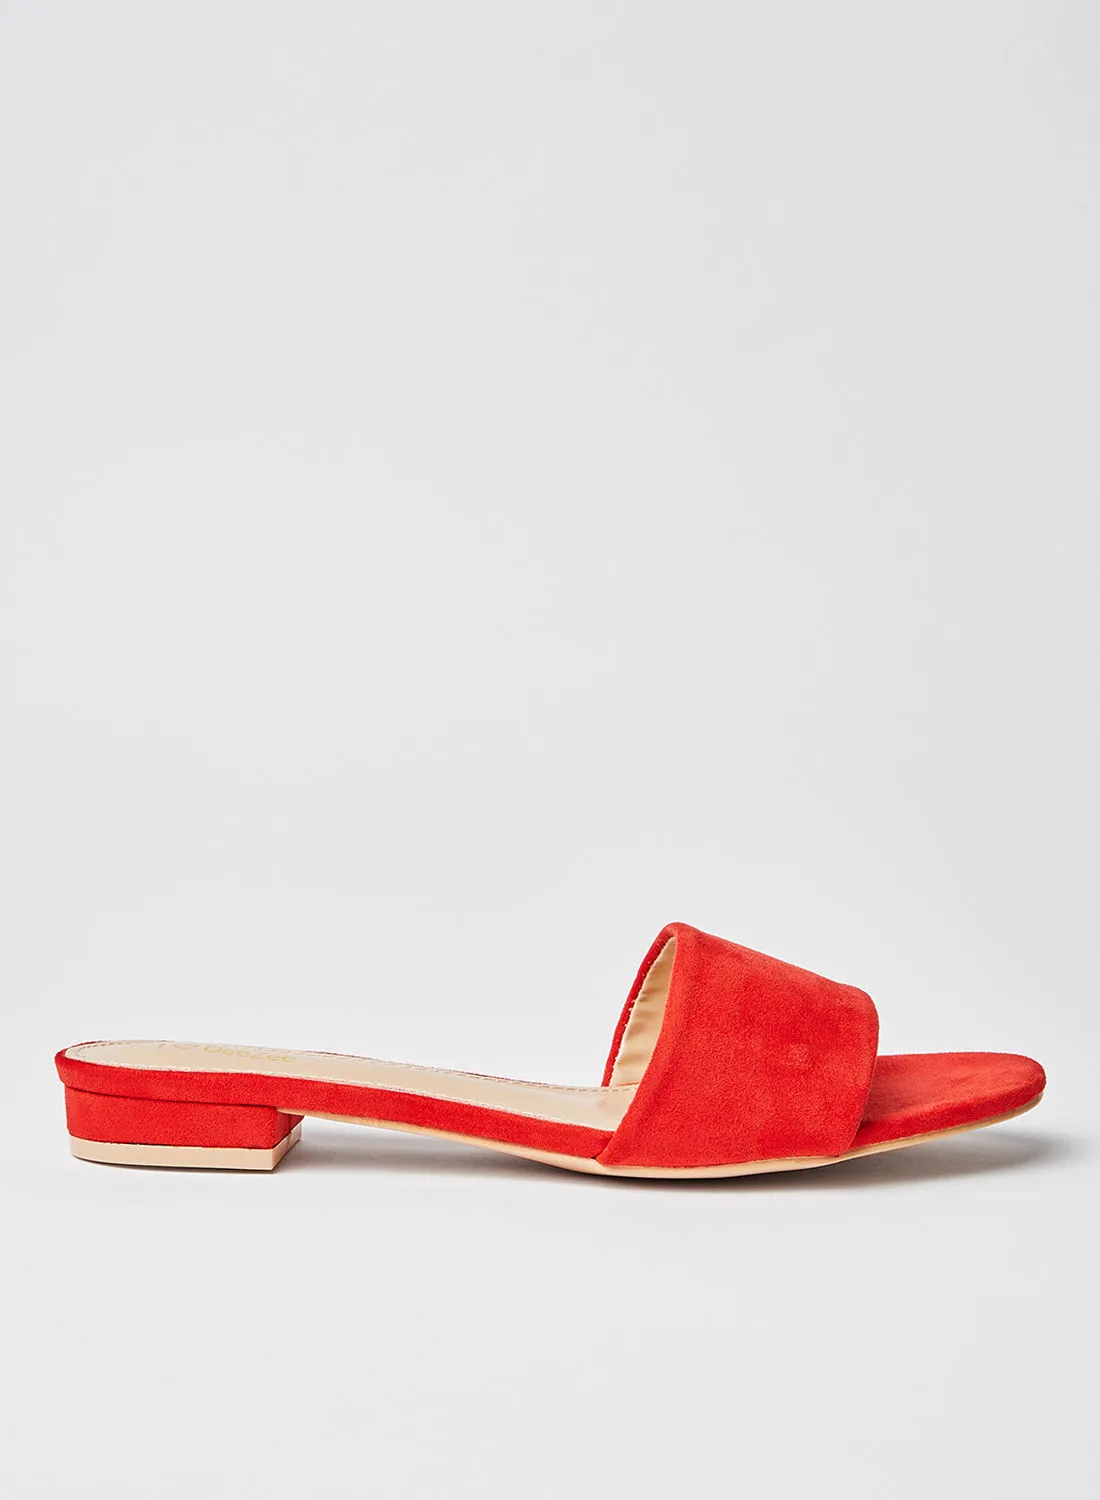 Deezee Dyed Slip On Flat Sandals Red